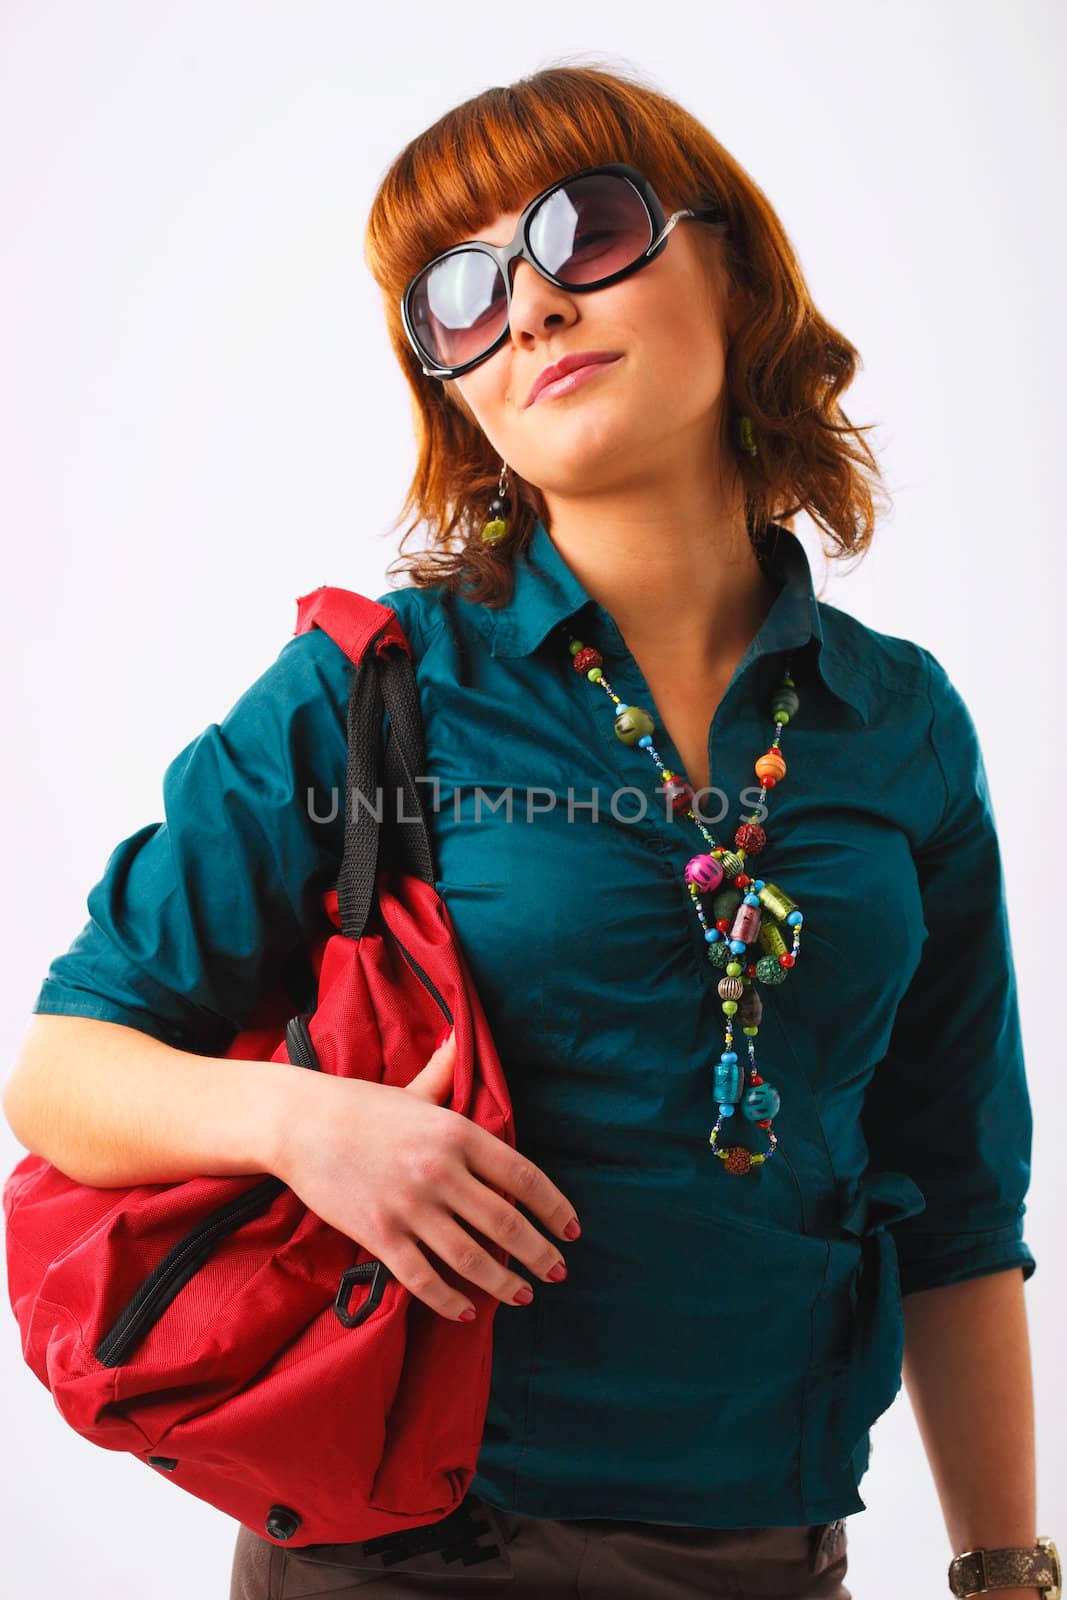 Beautiful young woman in sunglasses with her shopping bags